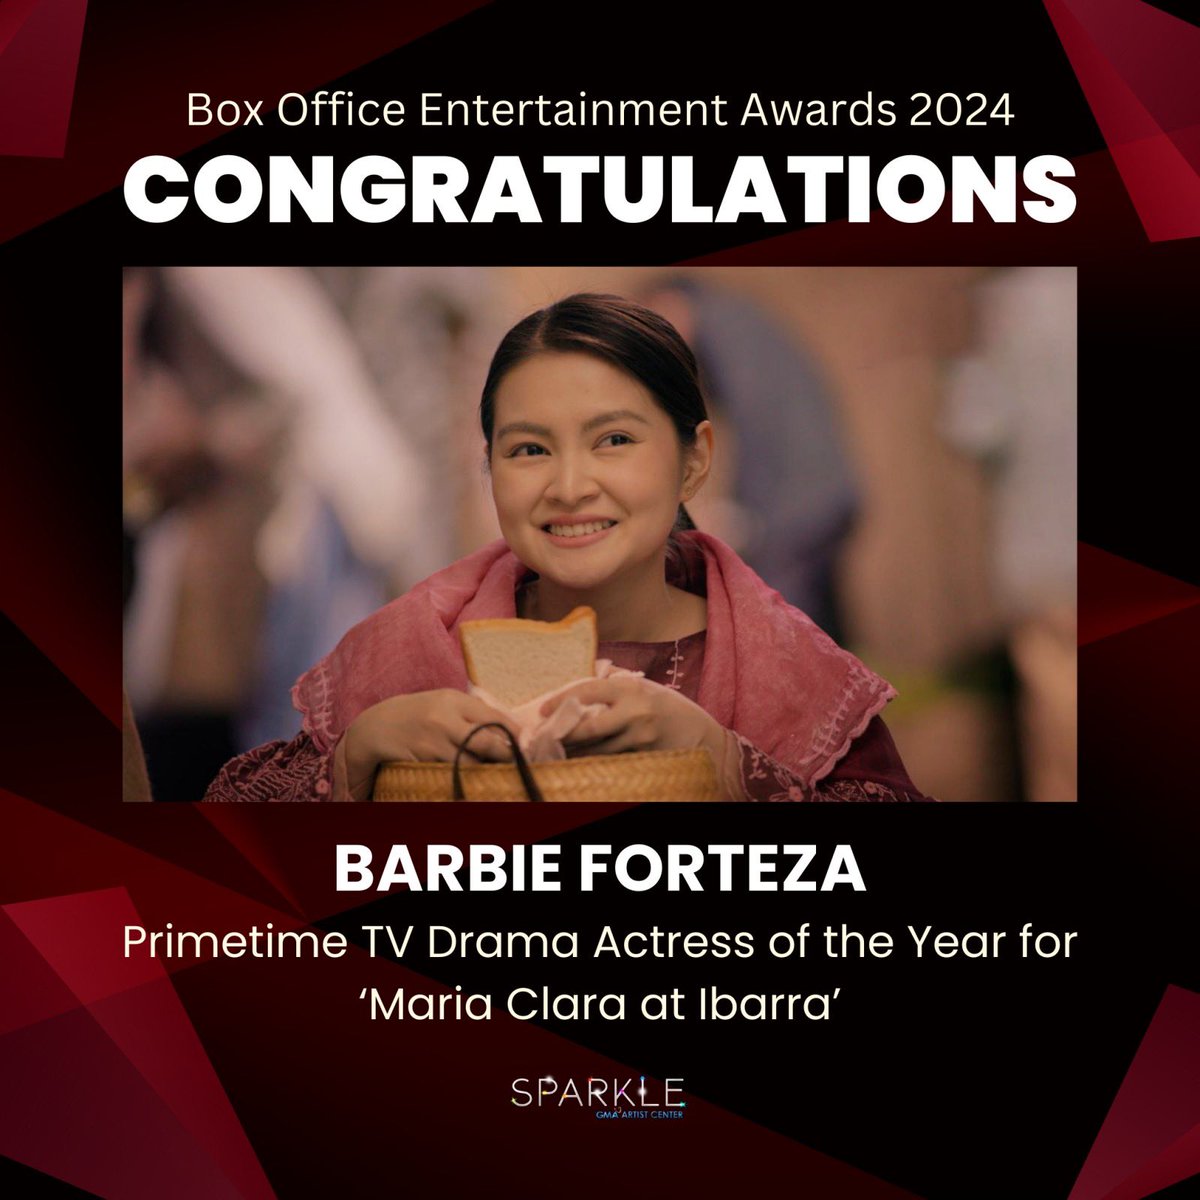 Congratulations to Barbie Forteza for winning the ‘Primetime TV Drama Actress of the Year’ award for the hit TV series ‘Maria Clara at Ibarra’ at the Box Office Entertainment Awards 2024. ✨

#BarbieForteza